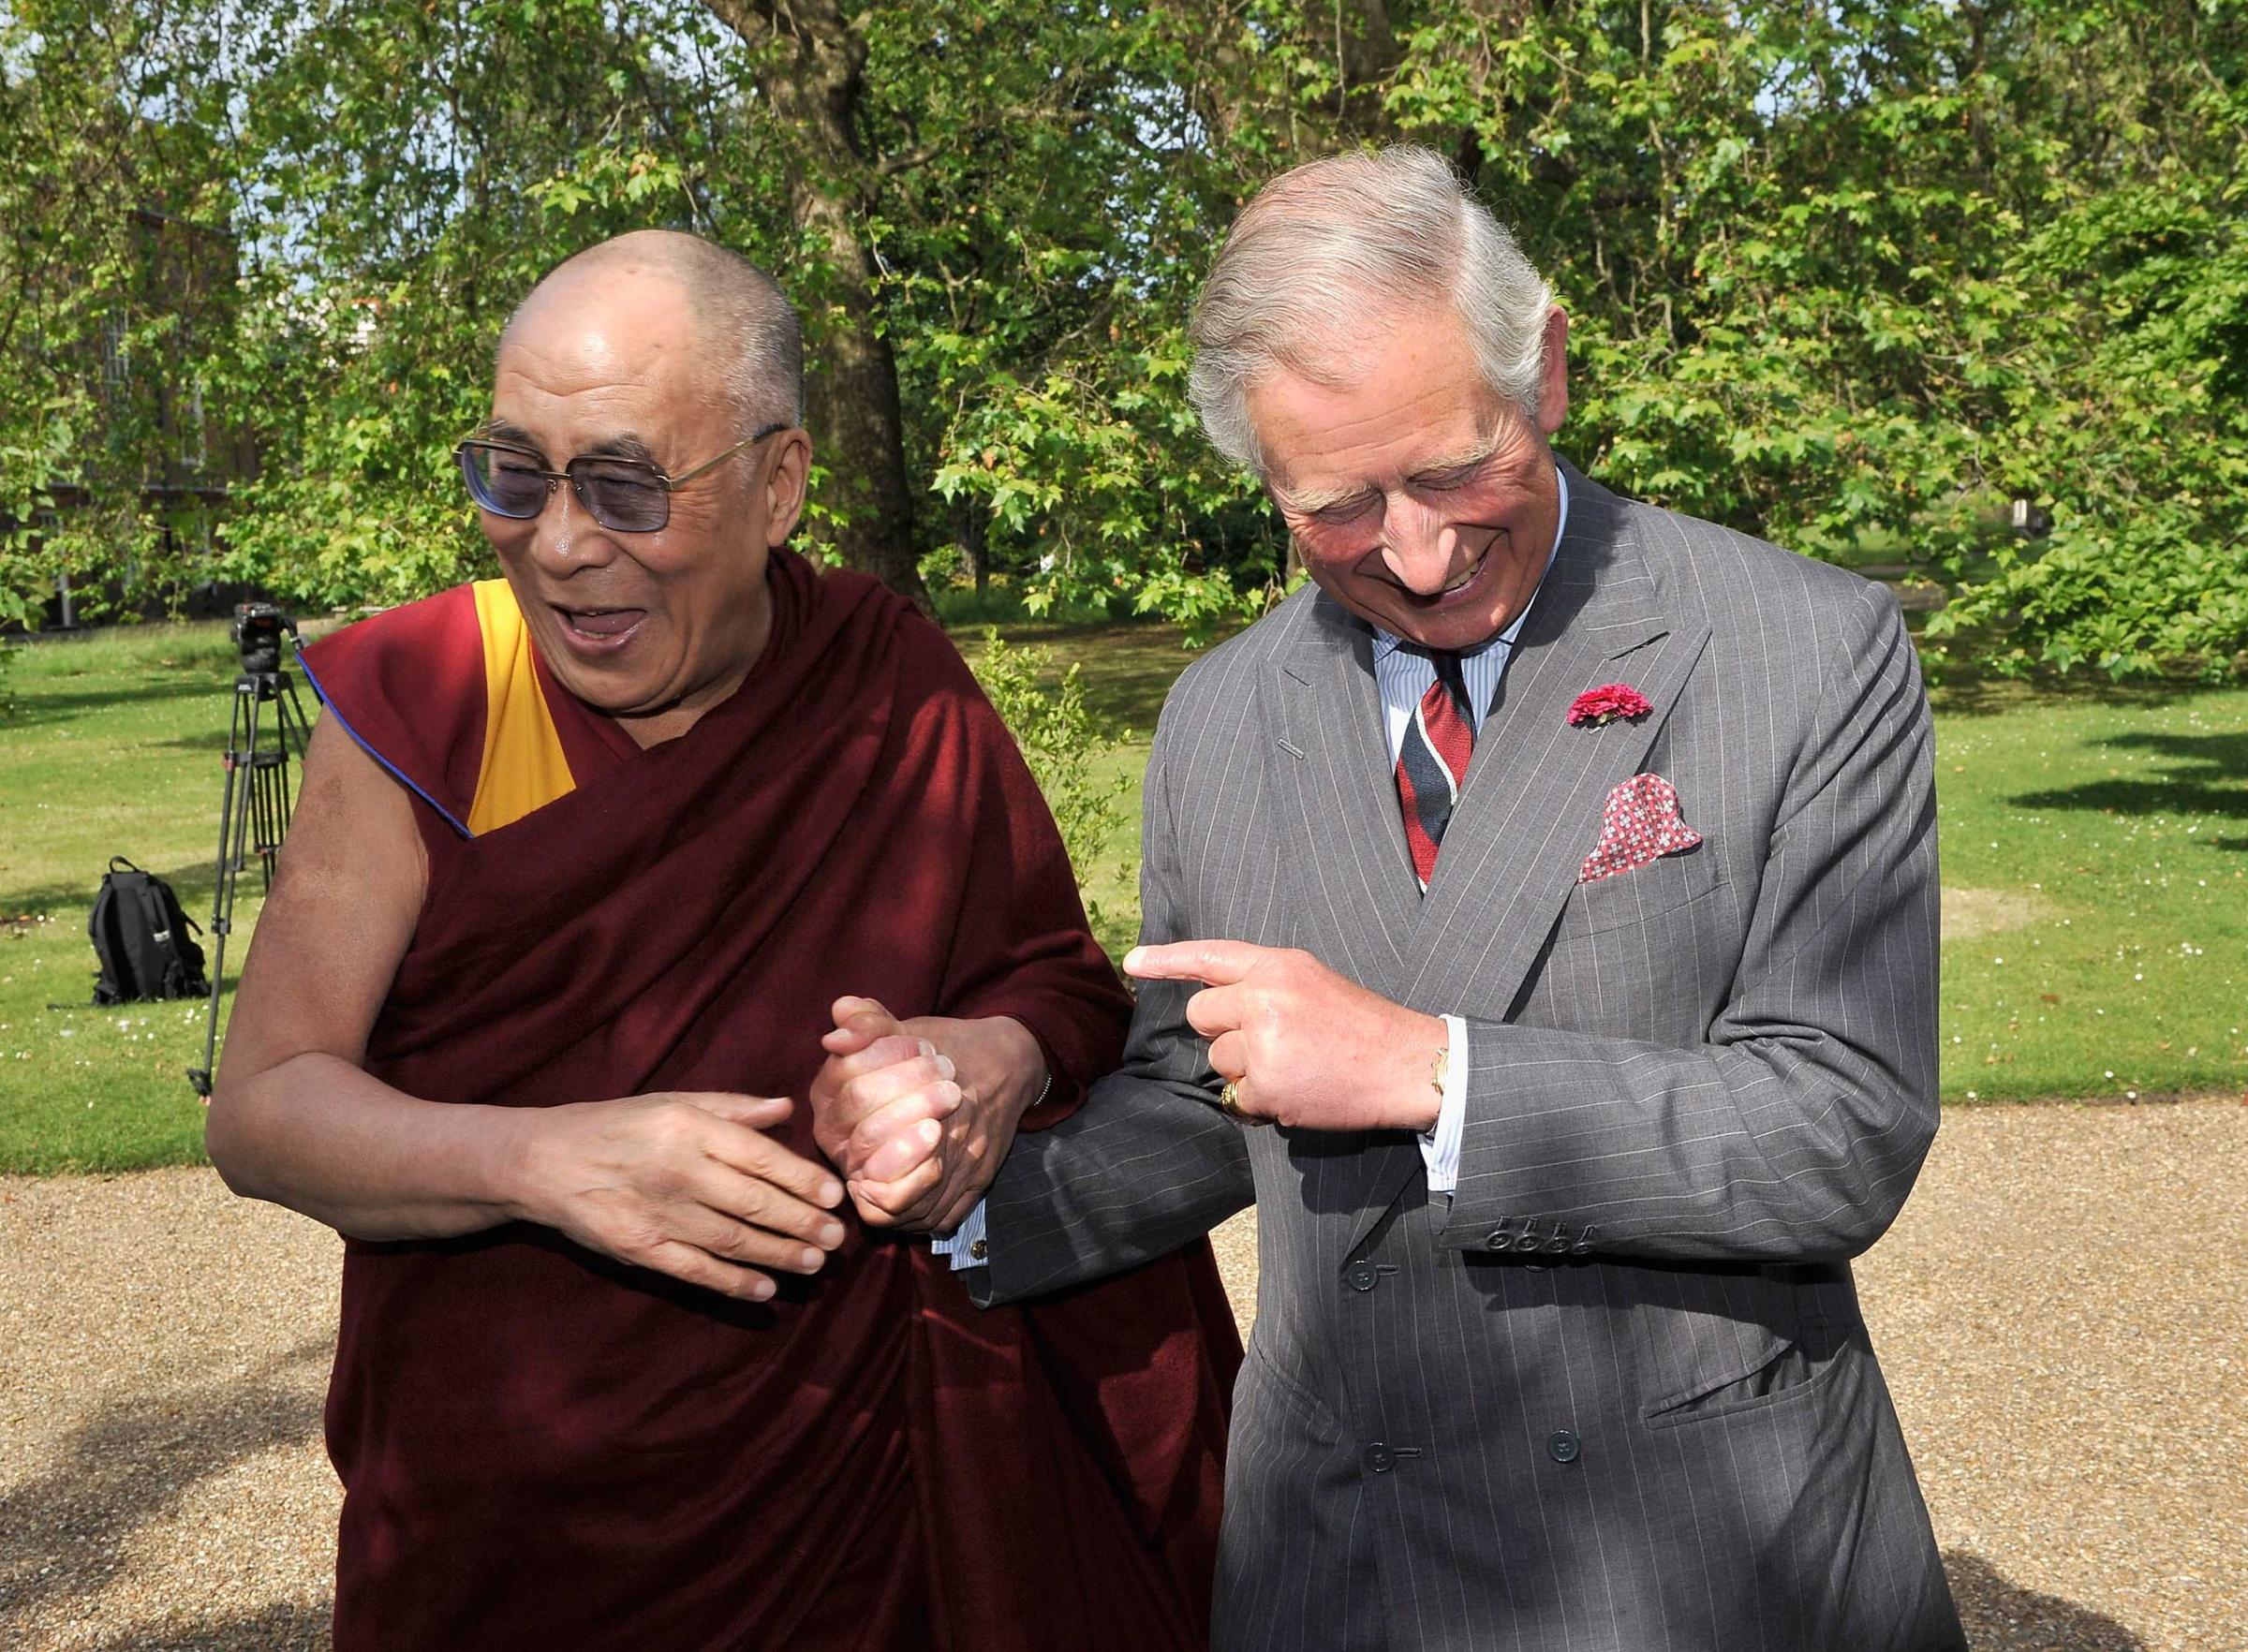 Prince Charles, Prince of Wales receives His Holiness the Dalai Lama at Clarence House in London, June 2012.